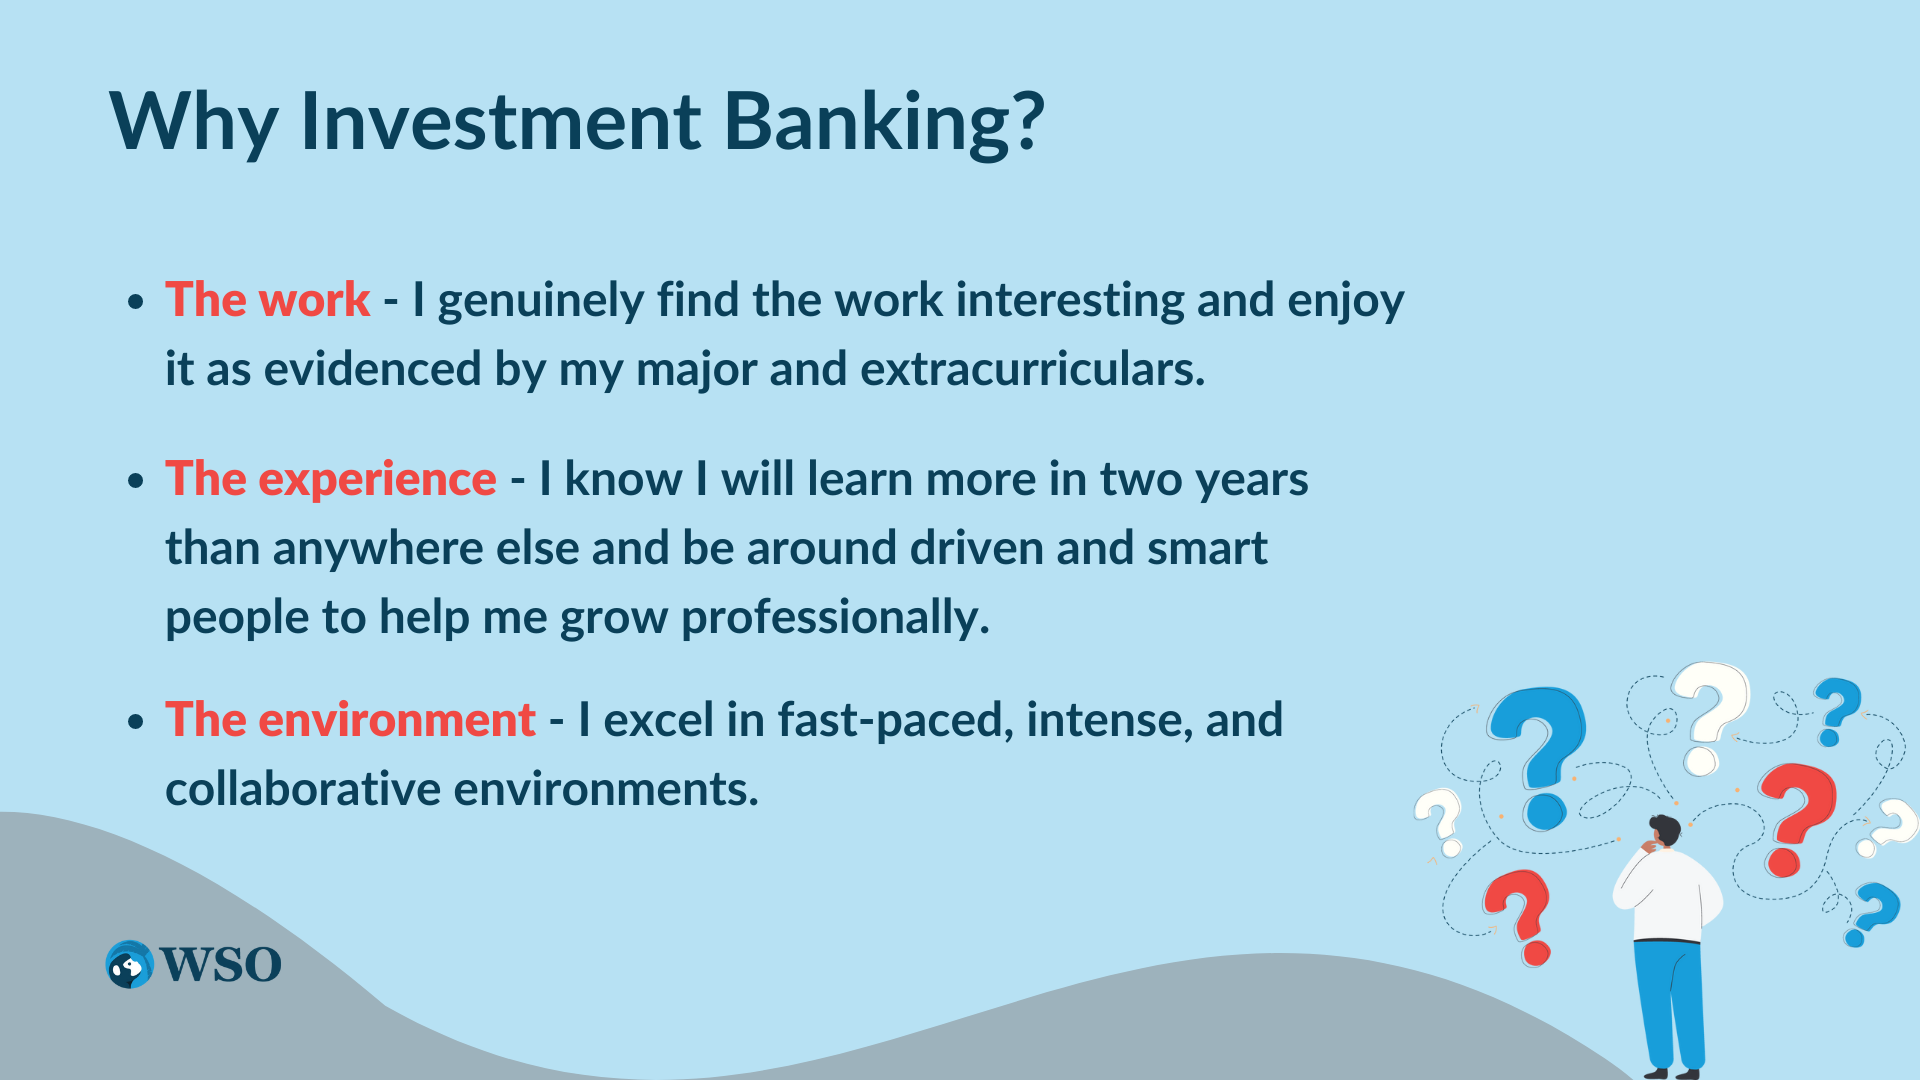 Why investment banking?